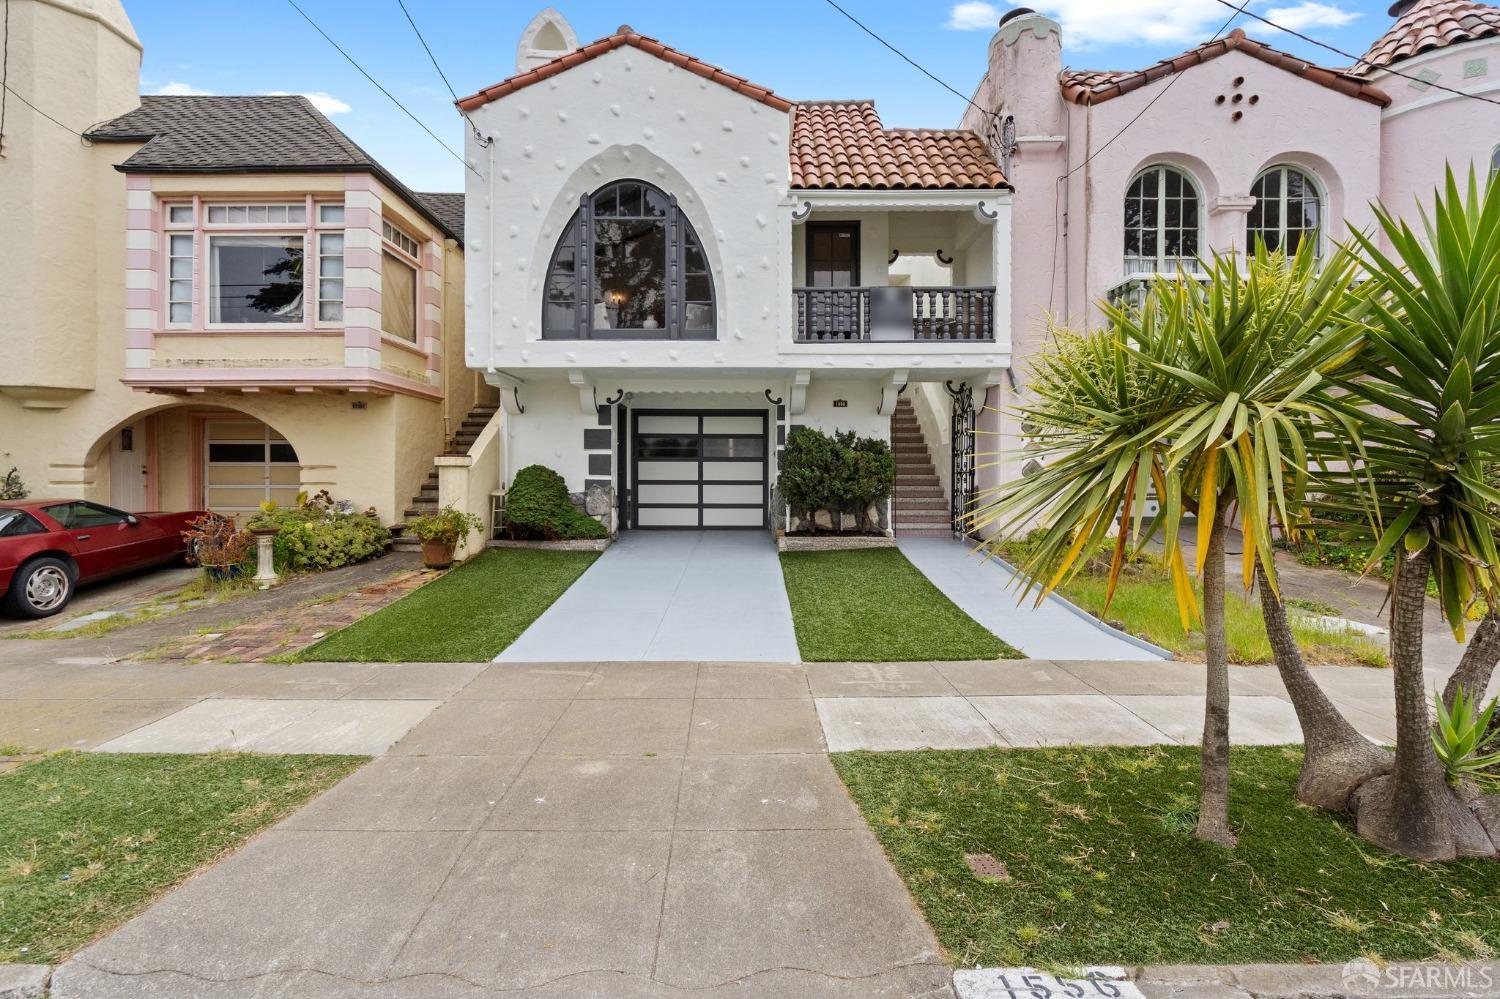 Photo of 1556 36th Ave in San Francisco, CA